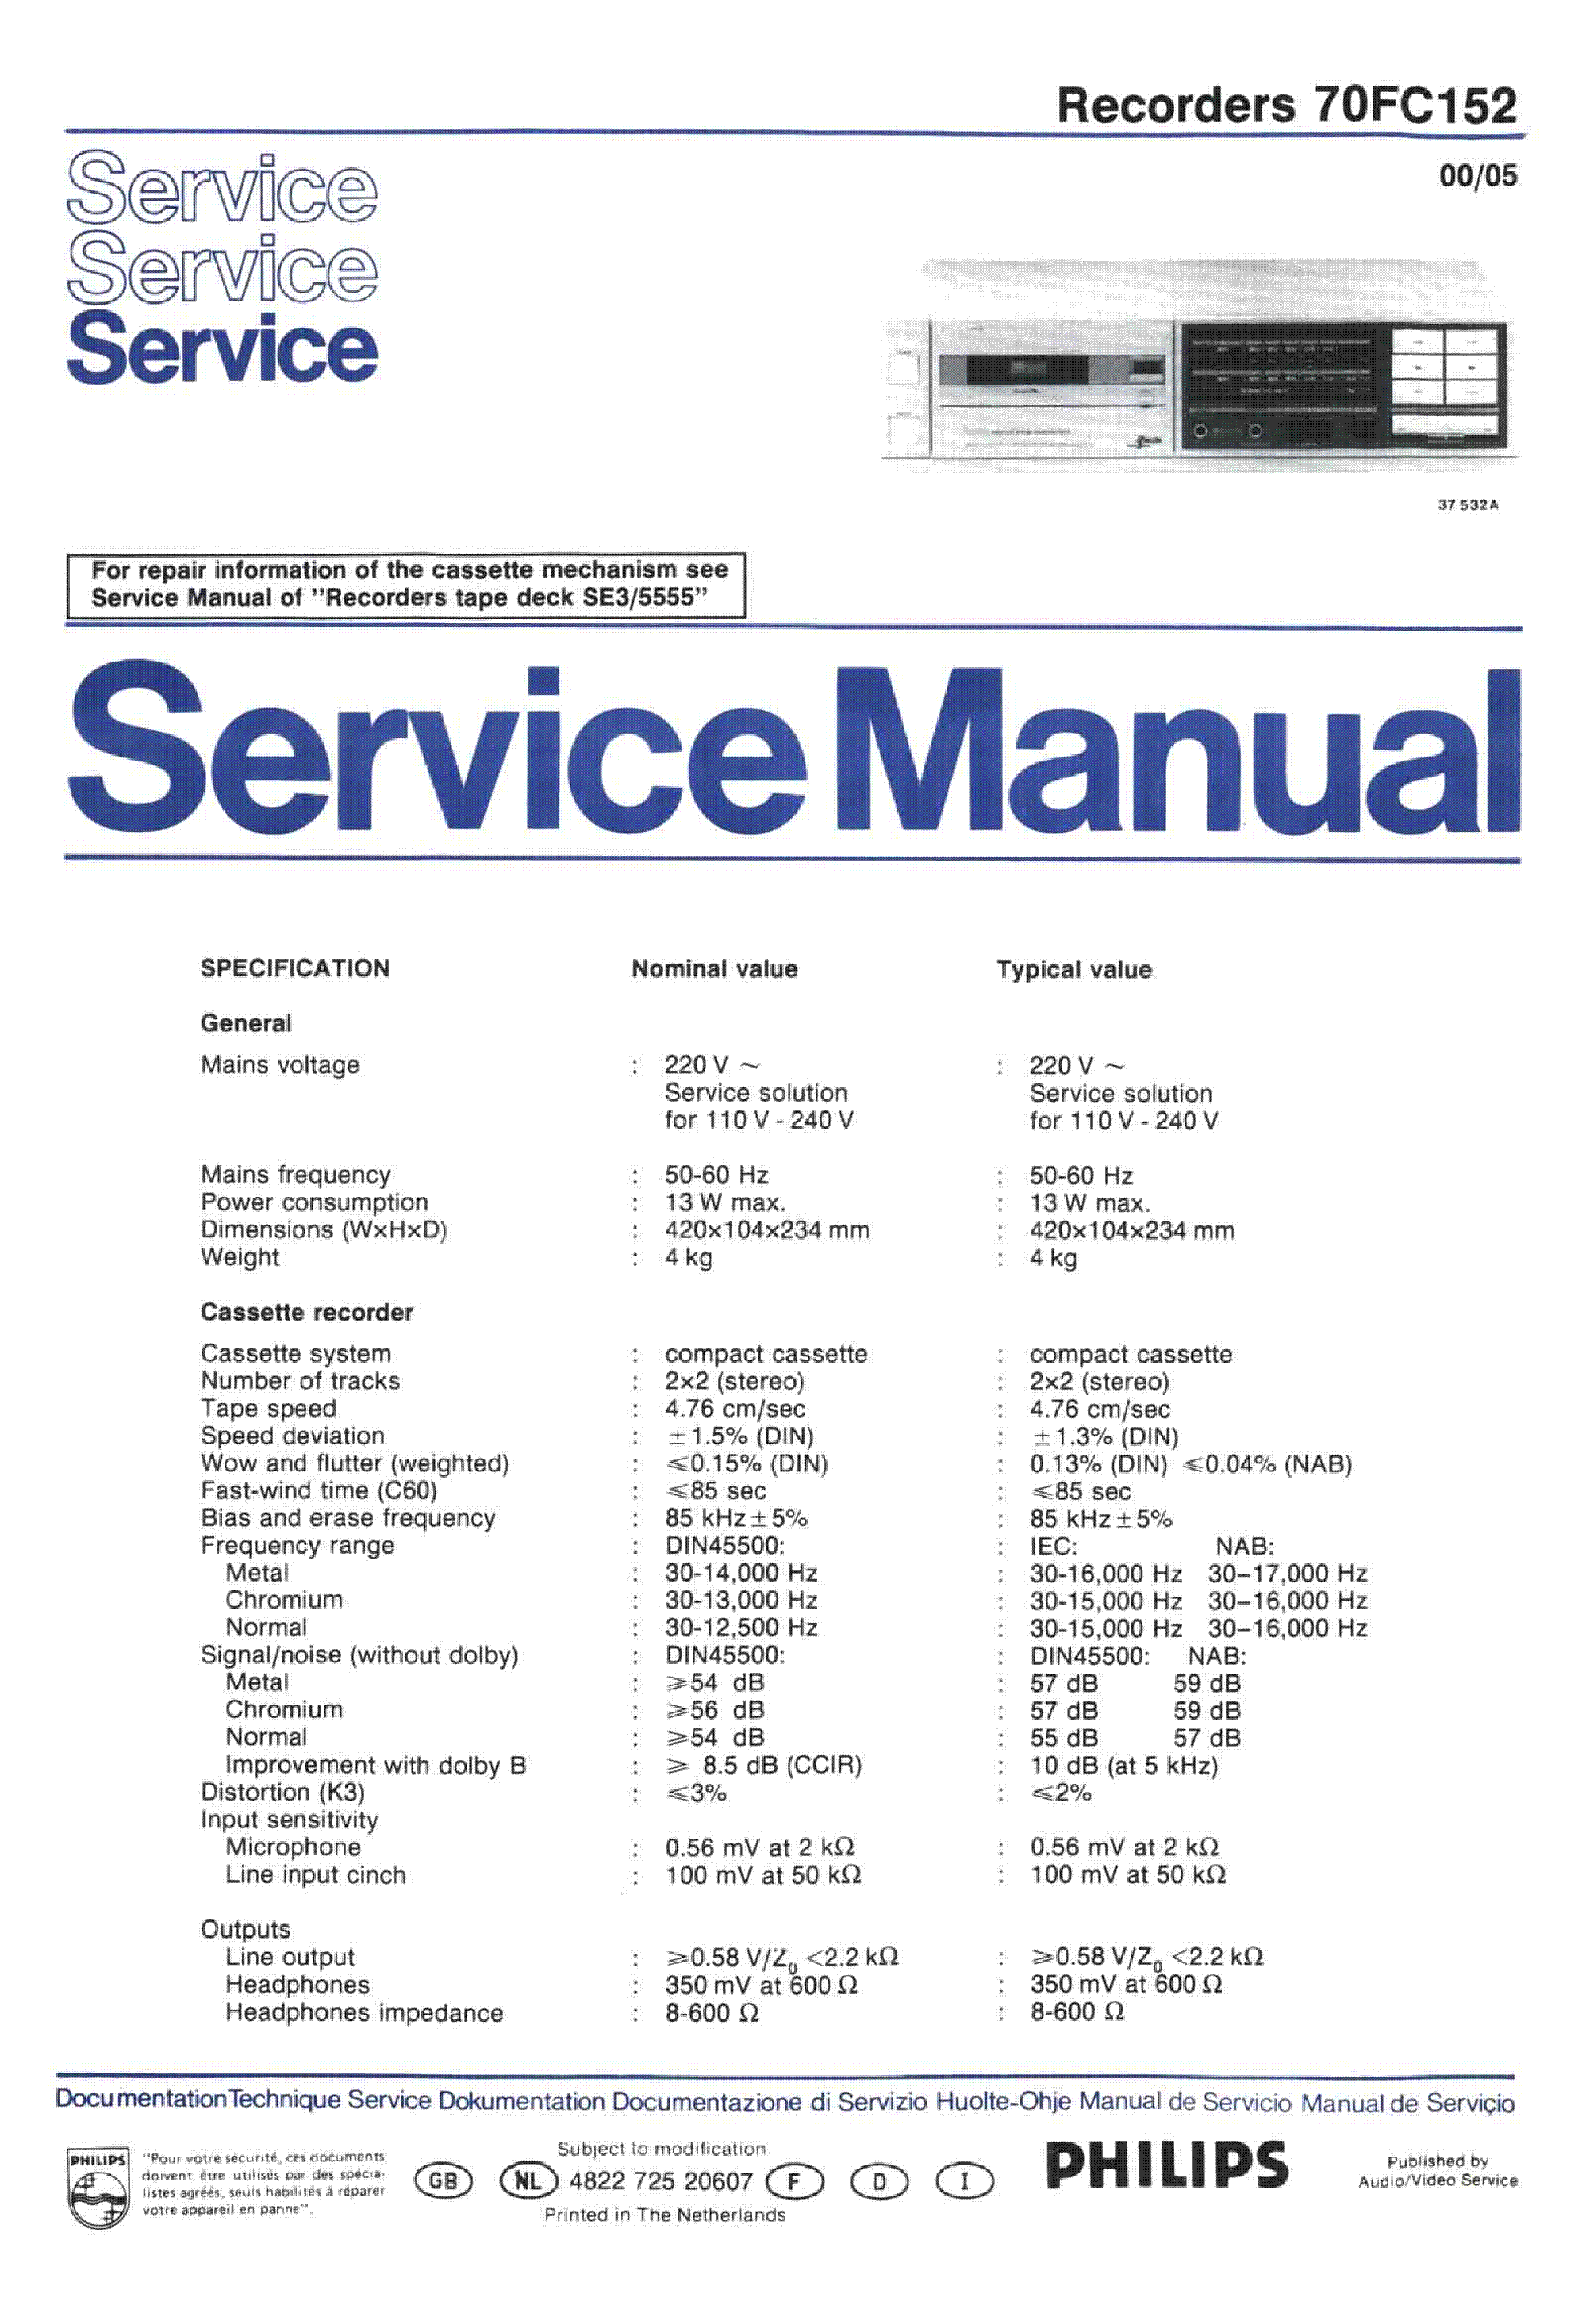 PHILIPS 70FC152 service manual (1st page)